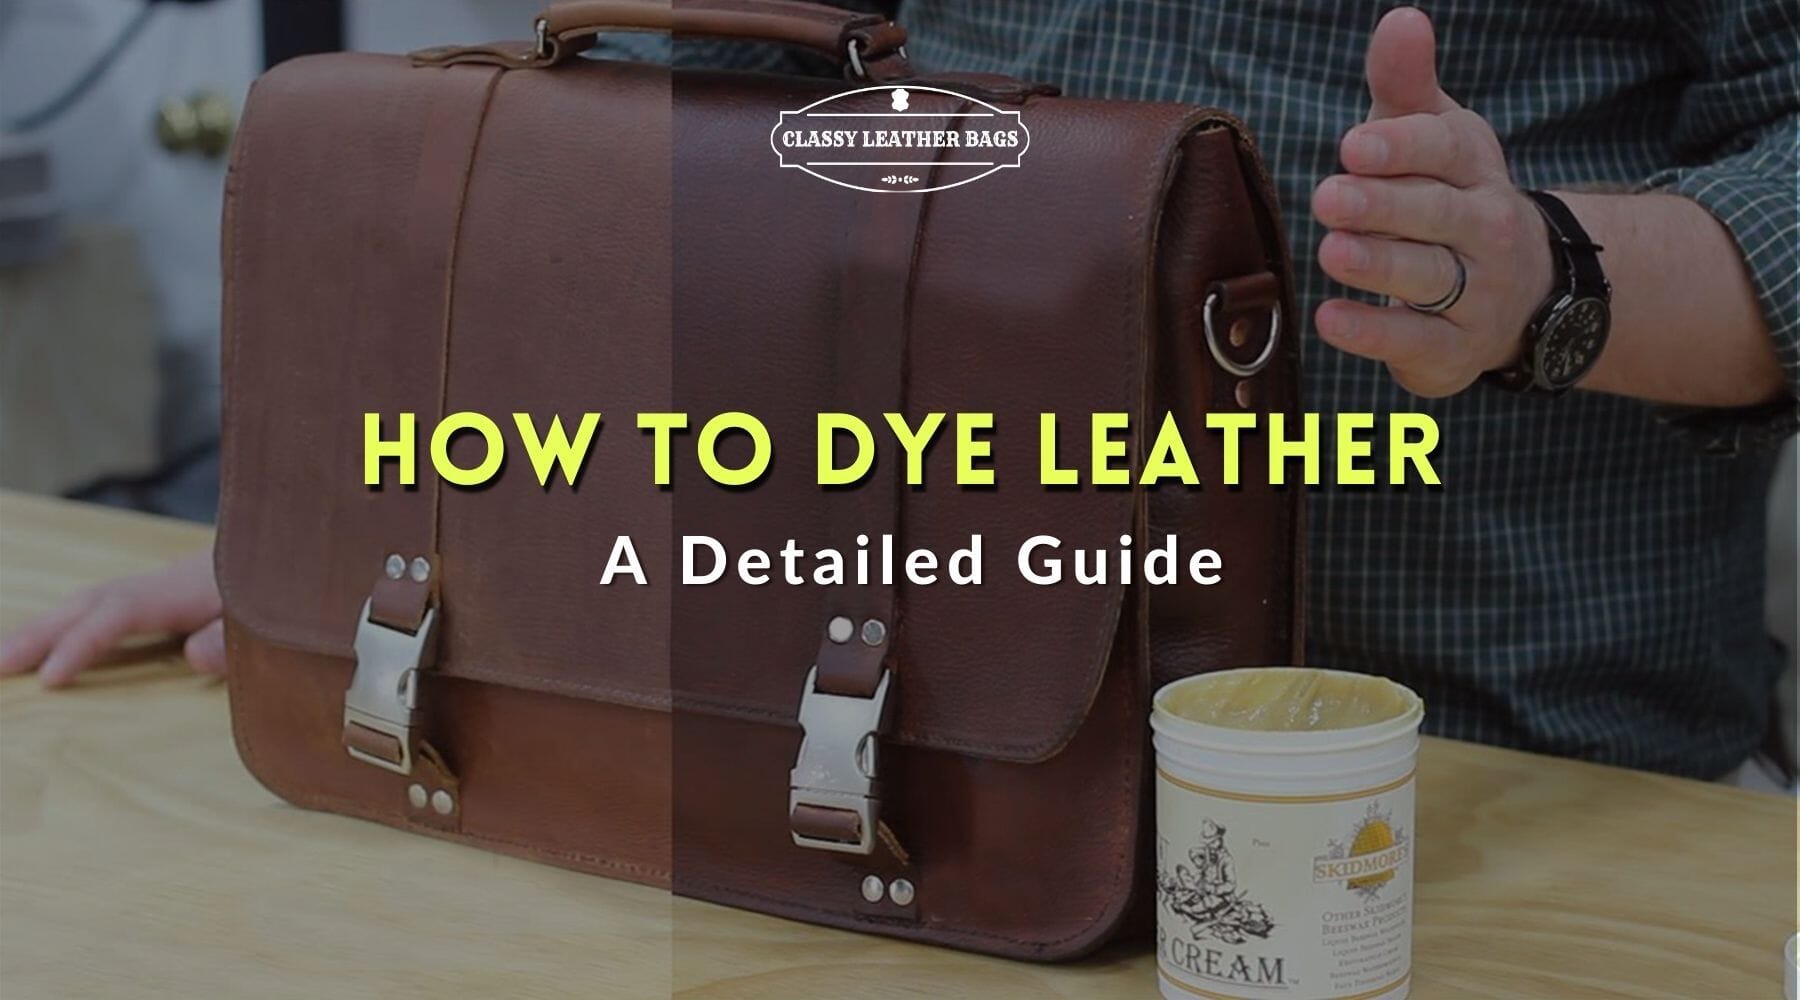 How to repair peeling leather from my purse - Quora